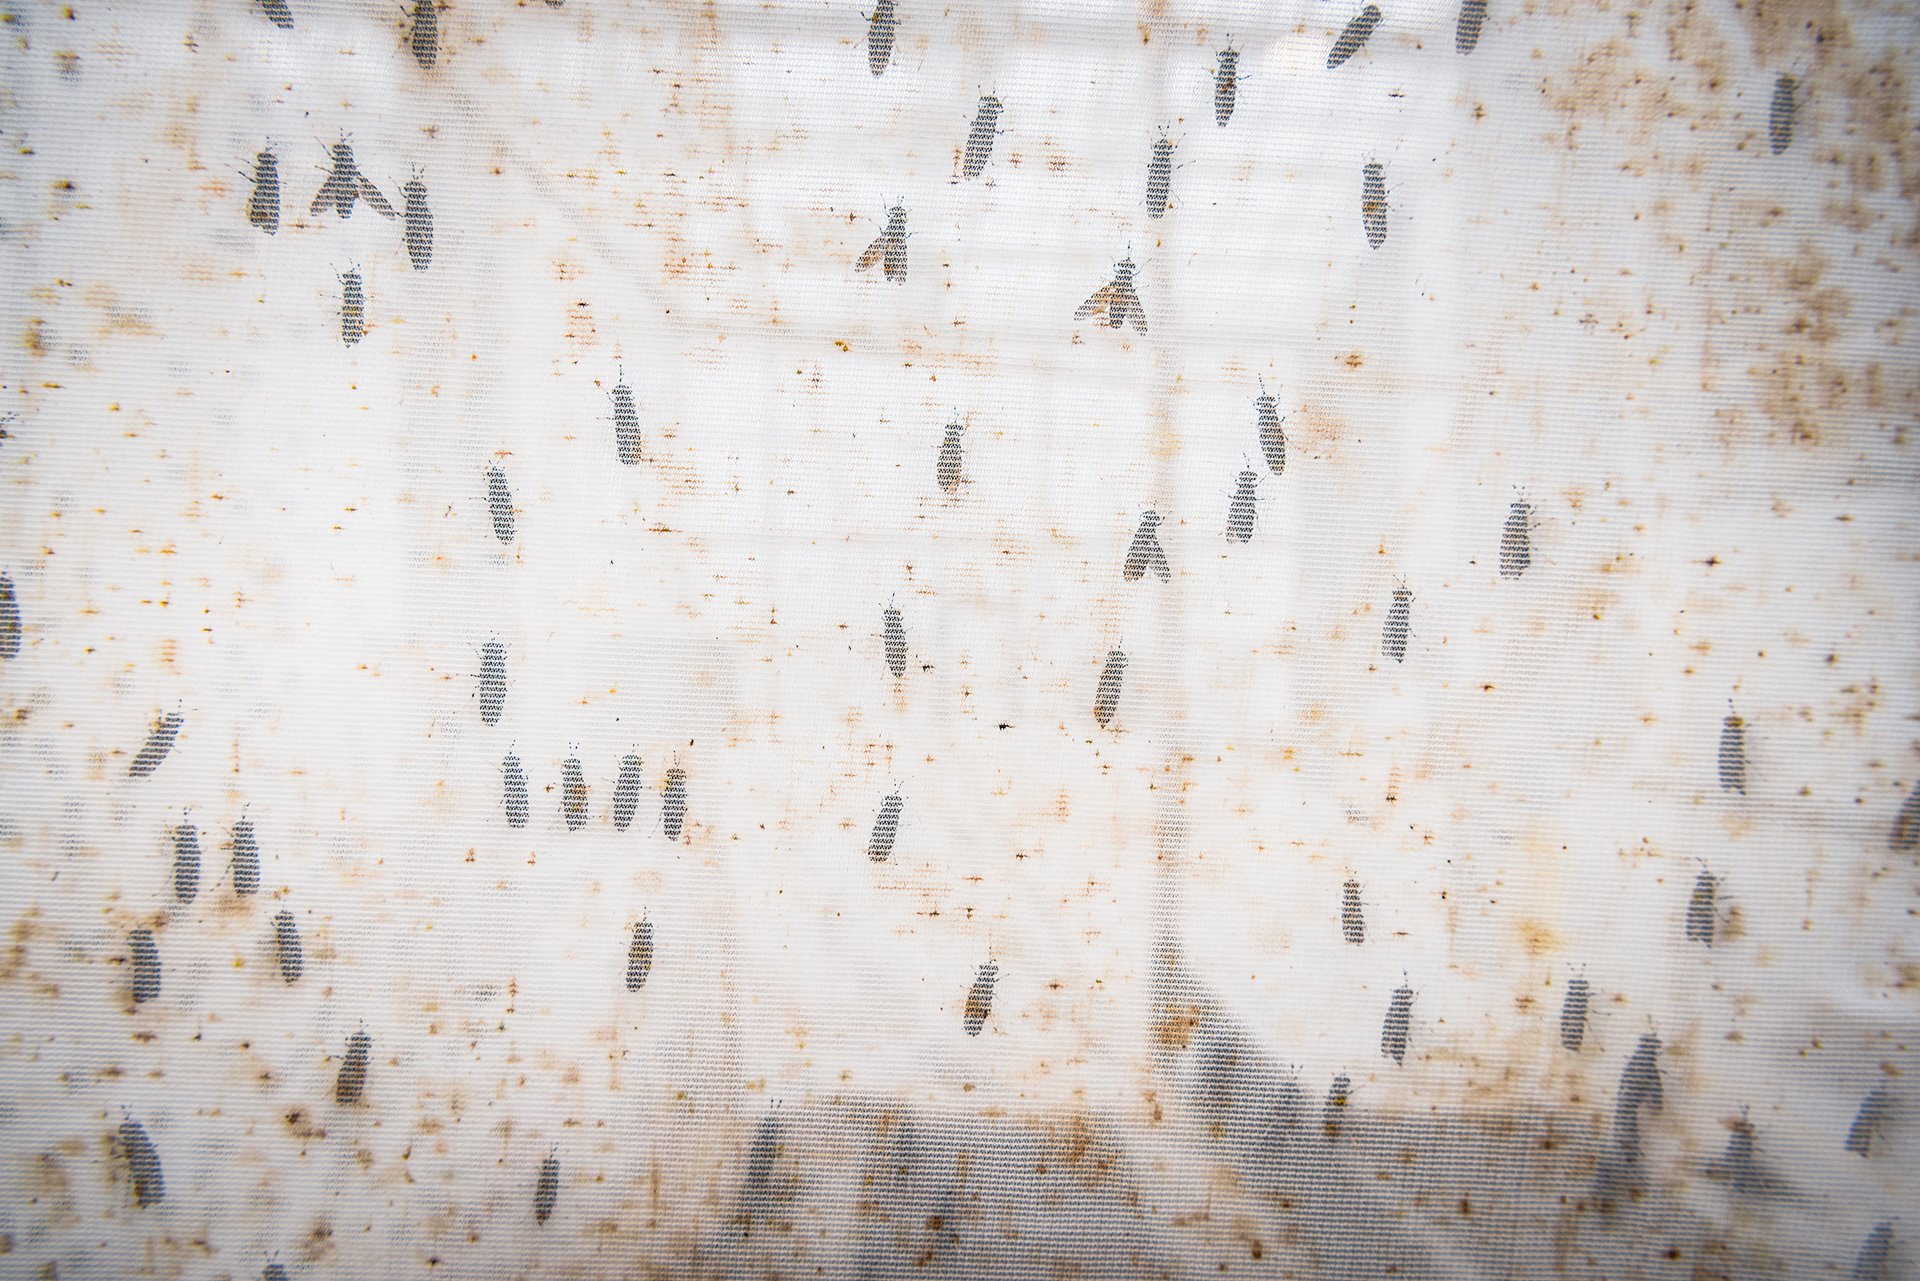 Black soldier flies lay eggs in a gauze enclosure , &nbsp;at an insect-protein production plant in Nesle, France. The site produces up to 10,000 tons of insect protein and oil annually, derived from black soldier fly larvae, transforming it into animal feed and fertilizer. The insect protein makes a more sustainable alternative to fishmeal and vegetable oils in, for example, fish and poultry farming and enriching soil for crops. More than 20,000 insect eggs are collected per second without human intervention, using artificial intelligence and optical recognition technology.